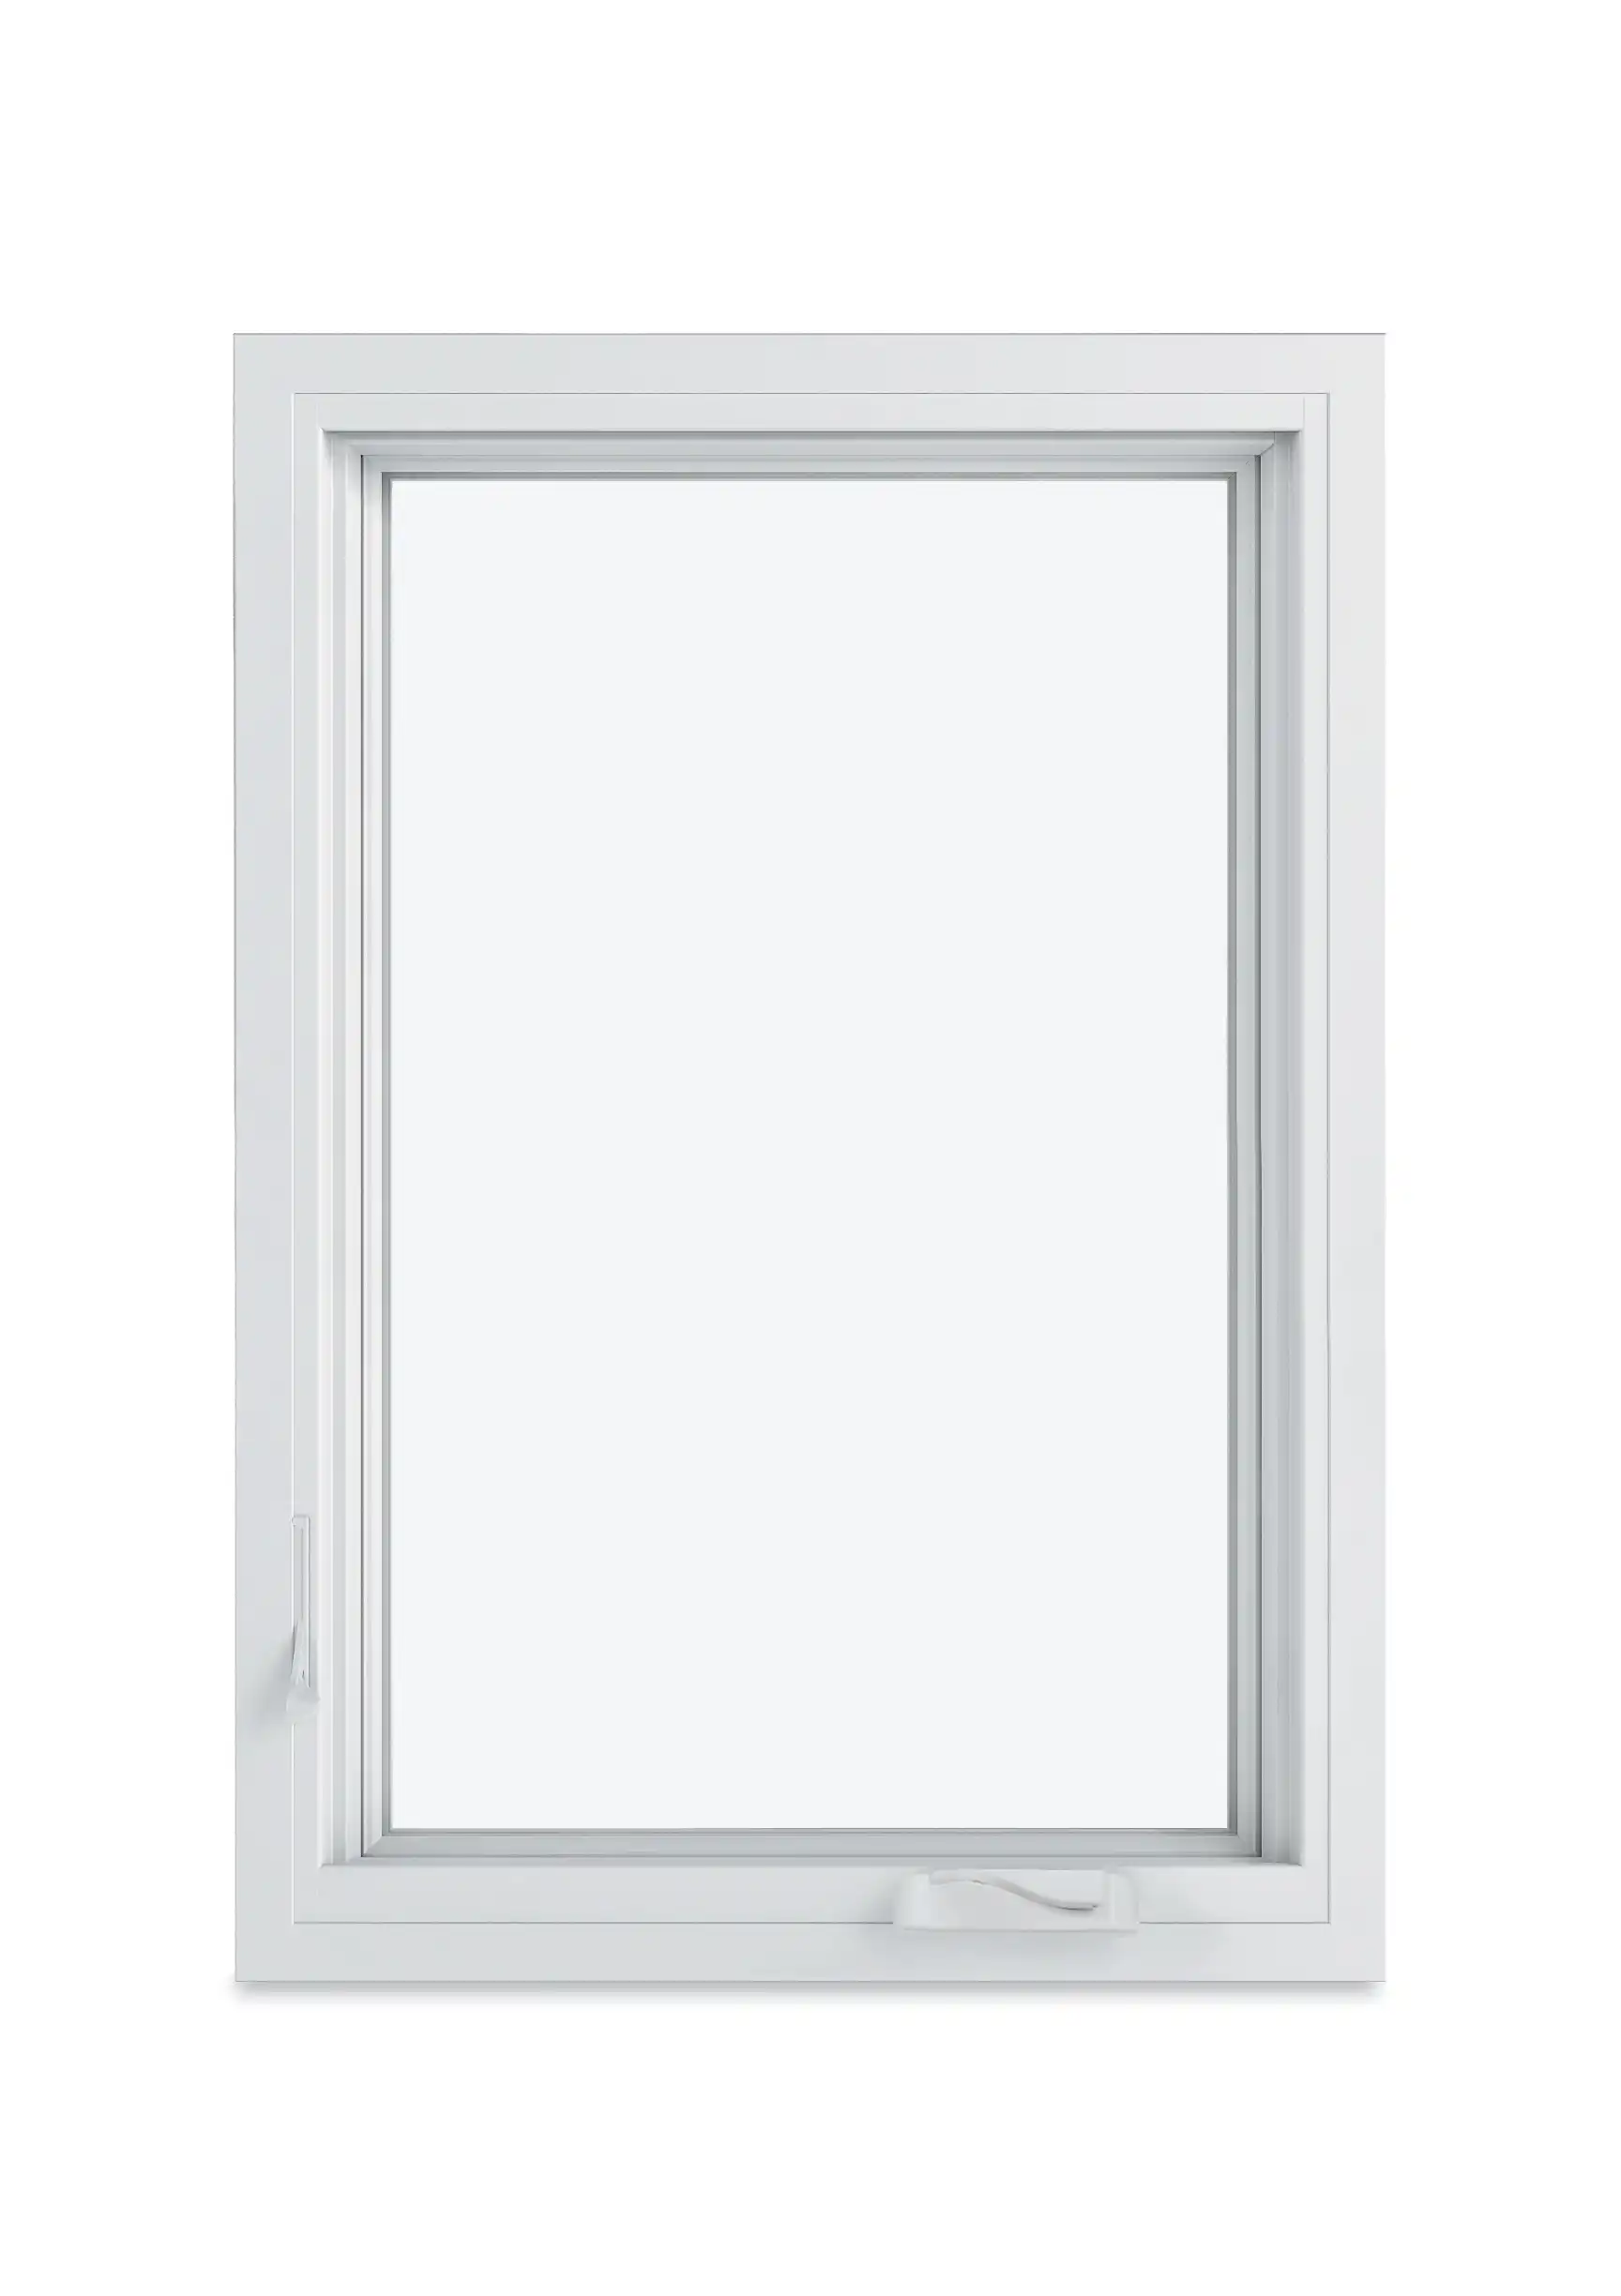 View of a standard Marvin Replacement Casement window.